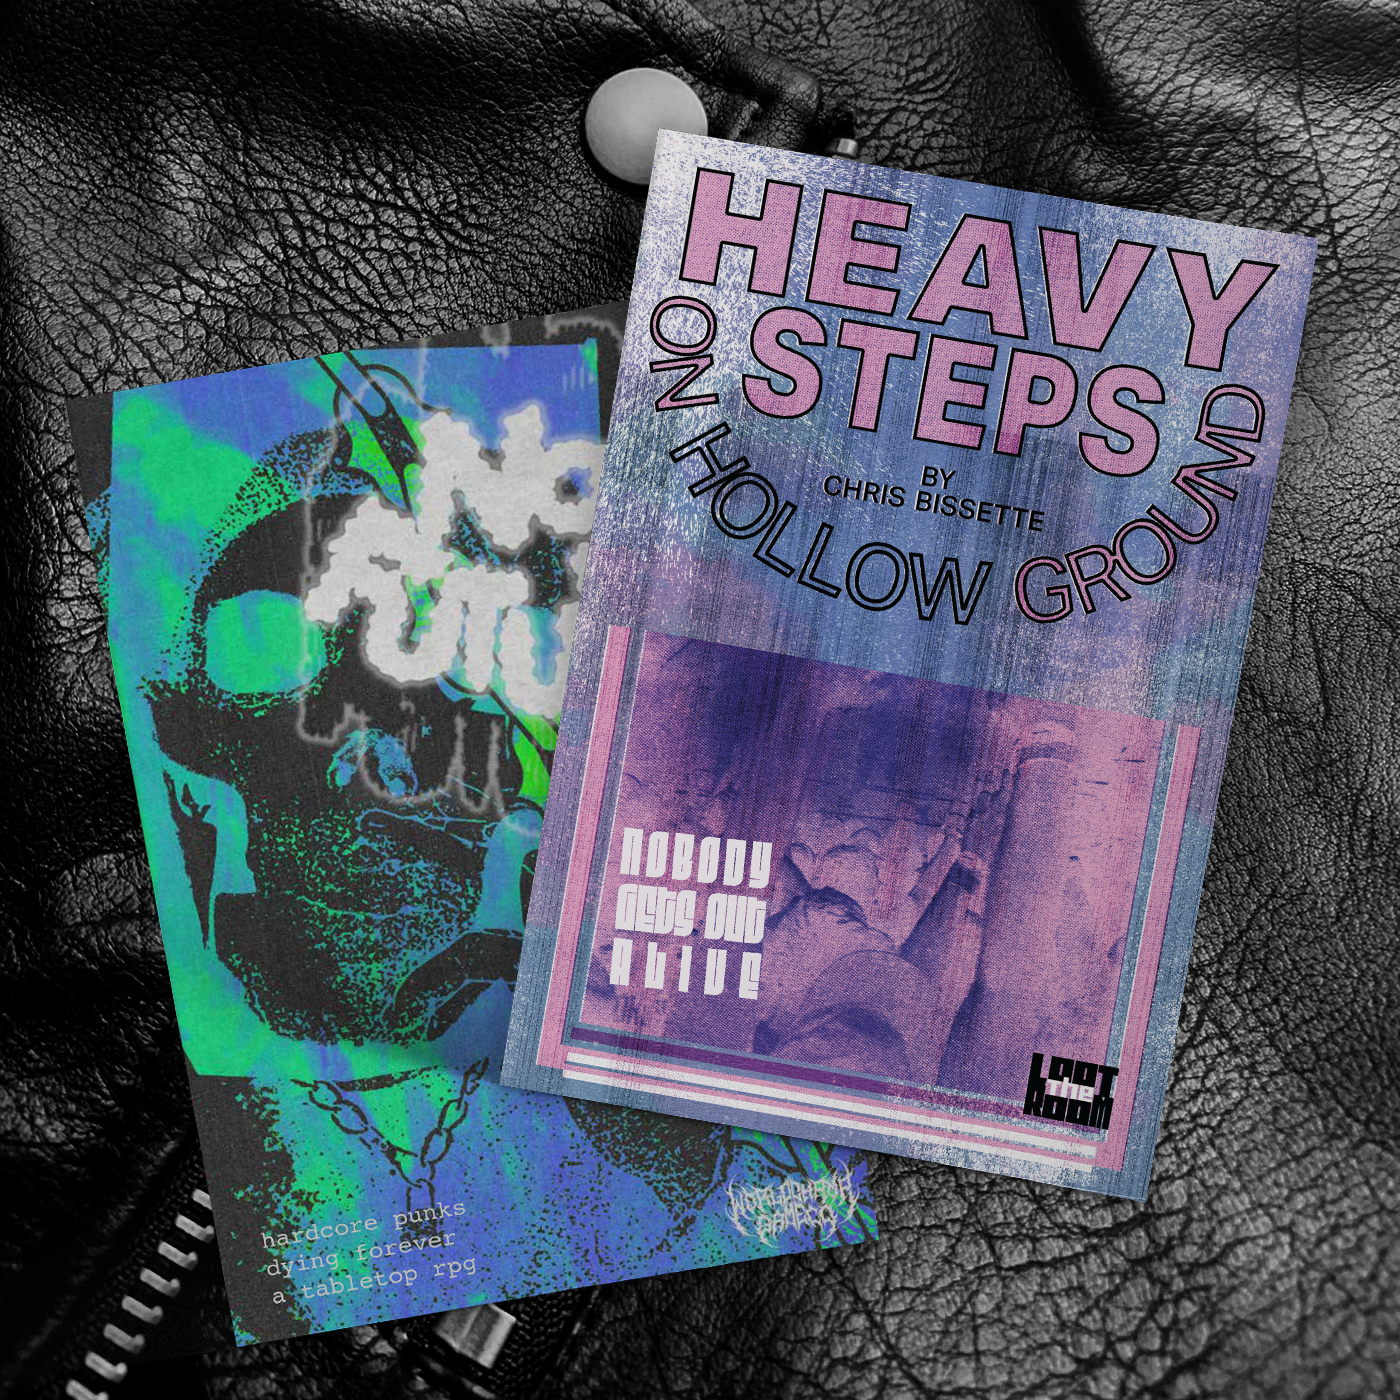 A pair of softcover zines sitting on a leather background. One is pink and purple and has the title "Heavy Steps On Hollow Ground". The other is green and blue and has the title "No Future".